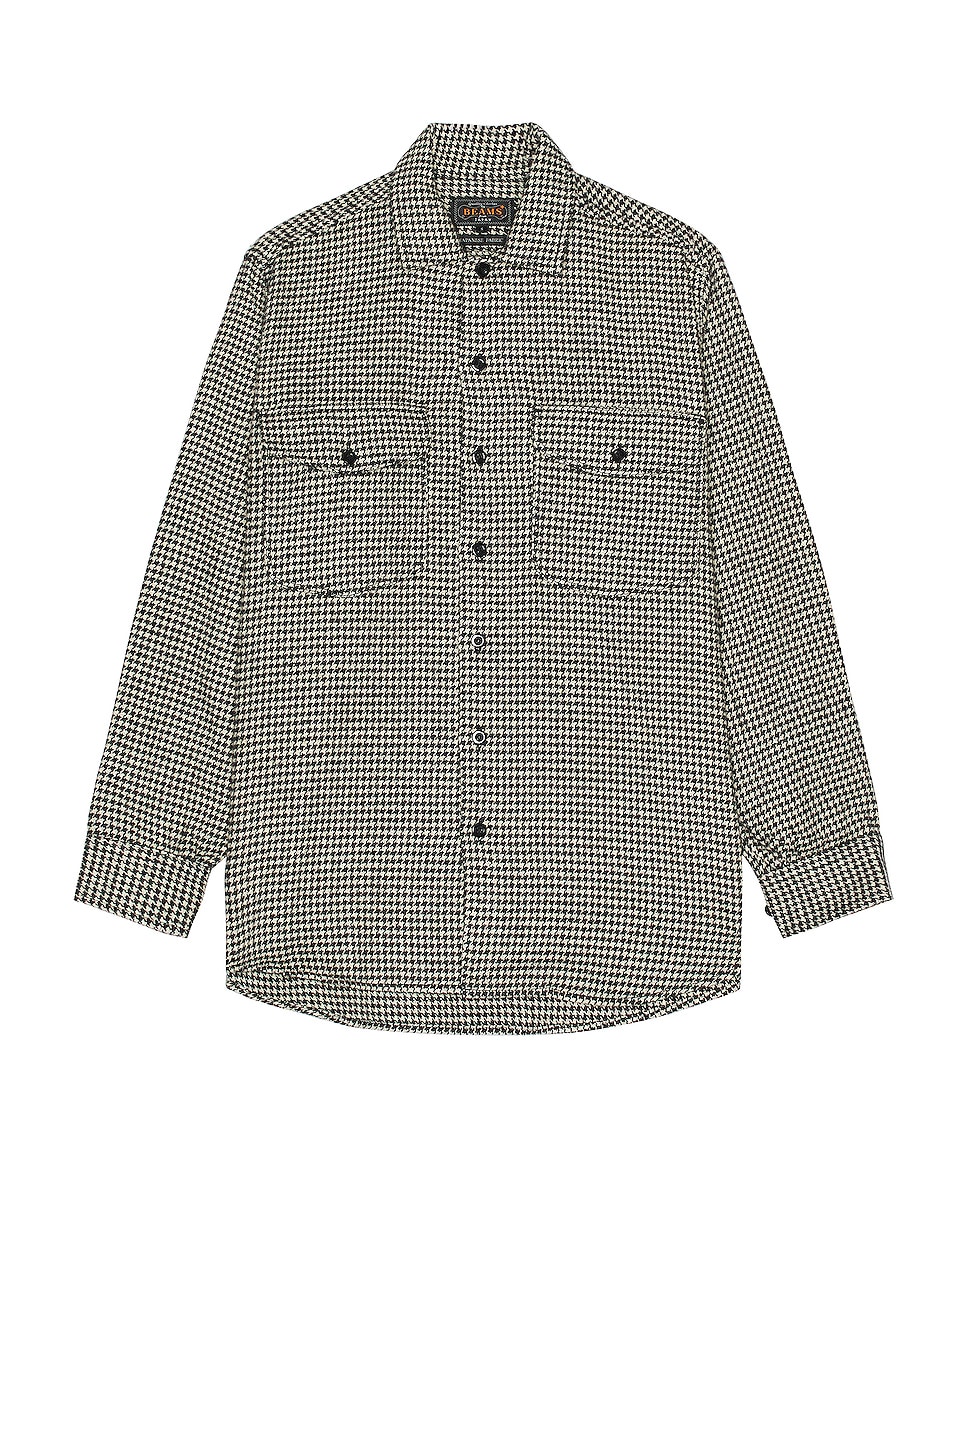 Image 1 of Beams Plus Work Classic Fit Houndstooth Shirt in Black